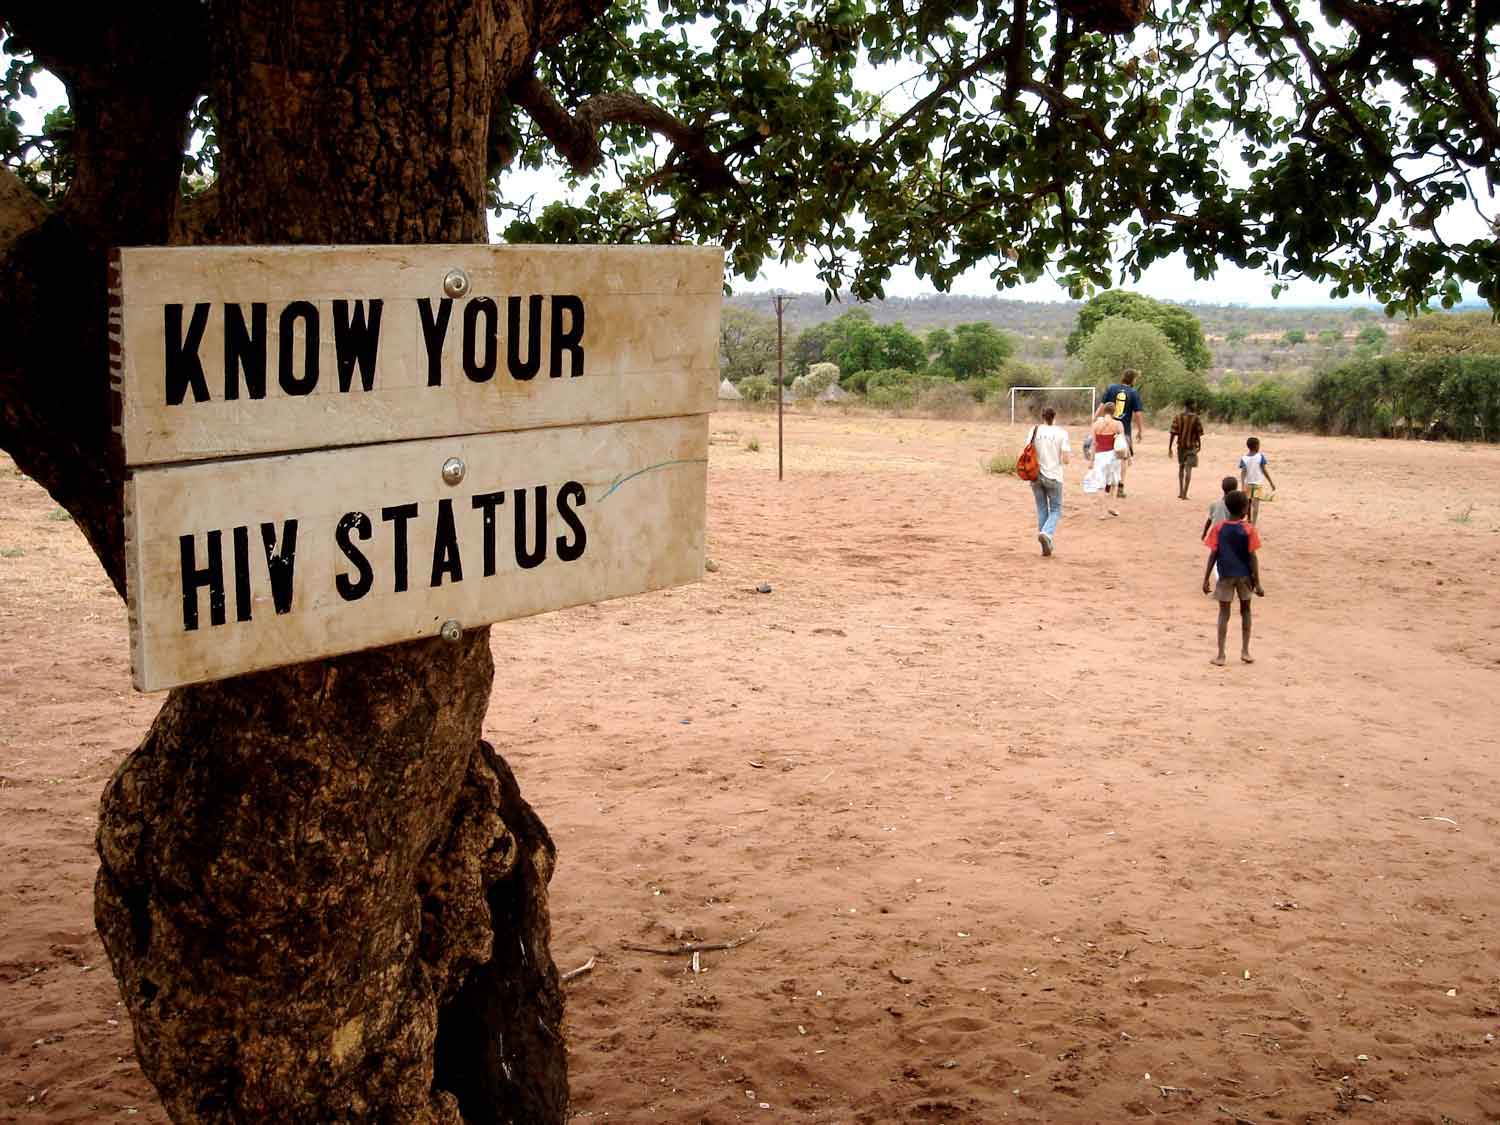 Sign nailed to a tree that reads "Know your HIV status" on a dirt soccer field with kids playing in background.